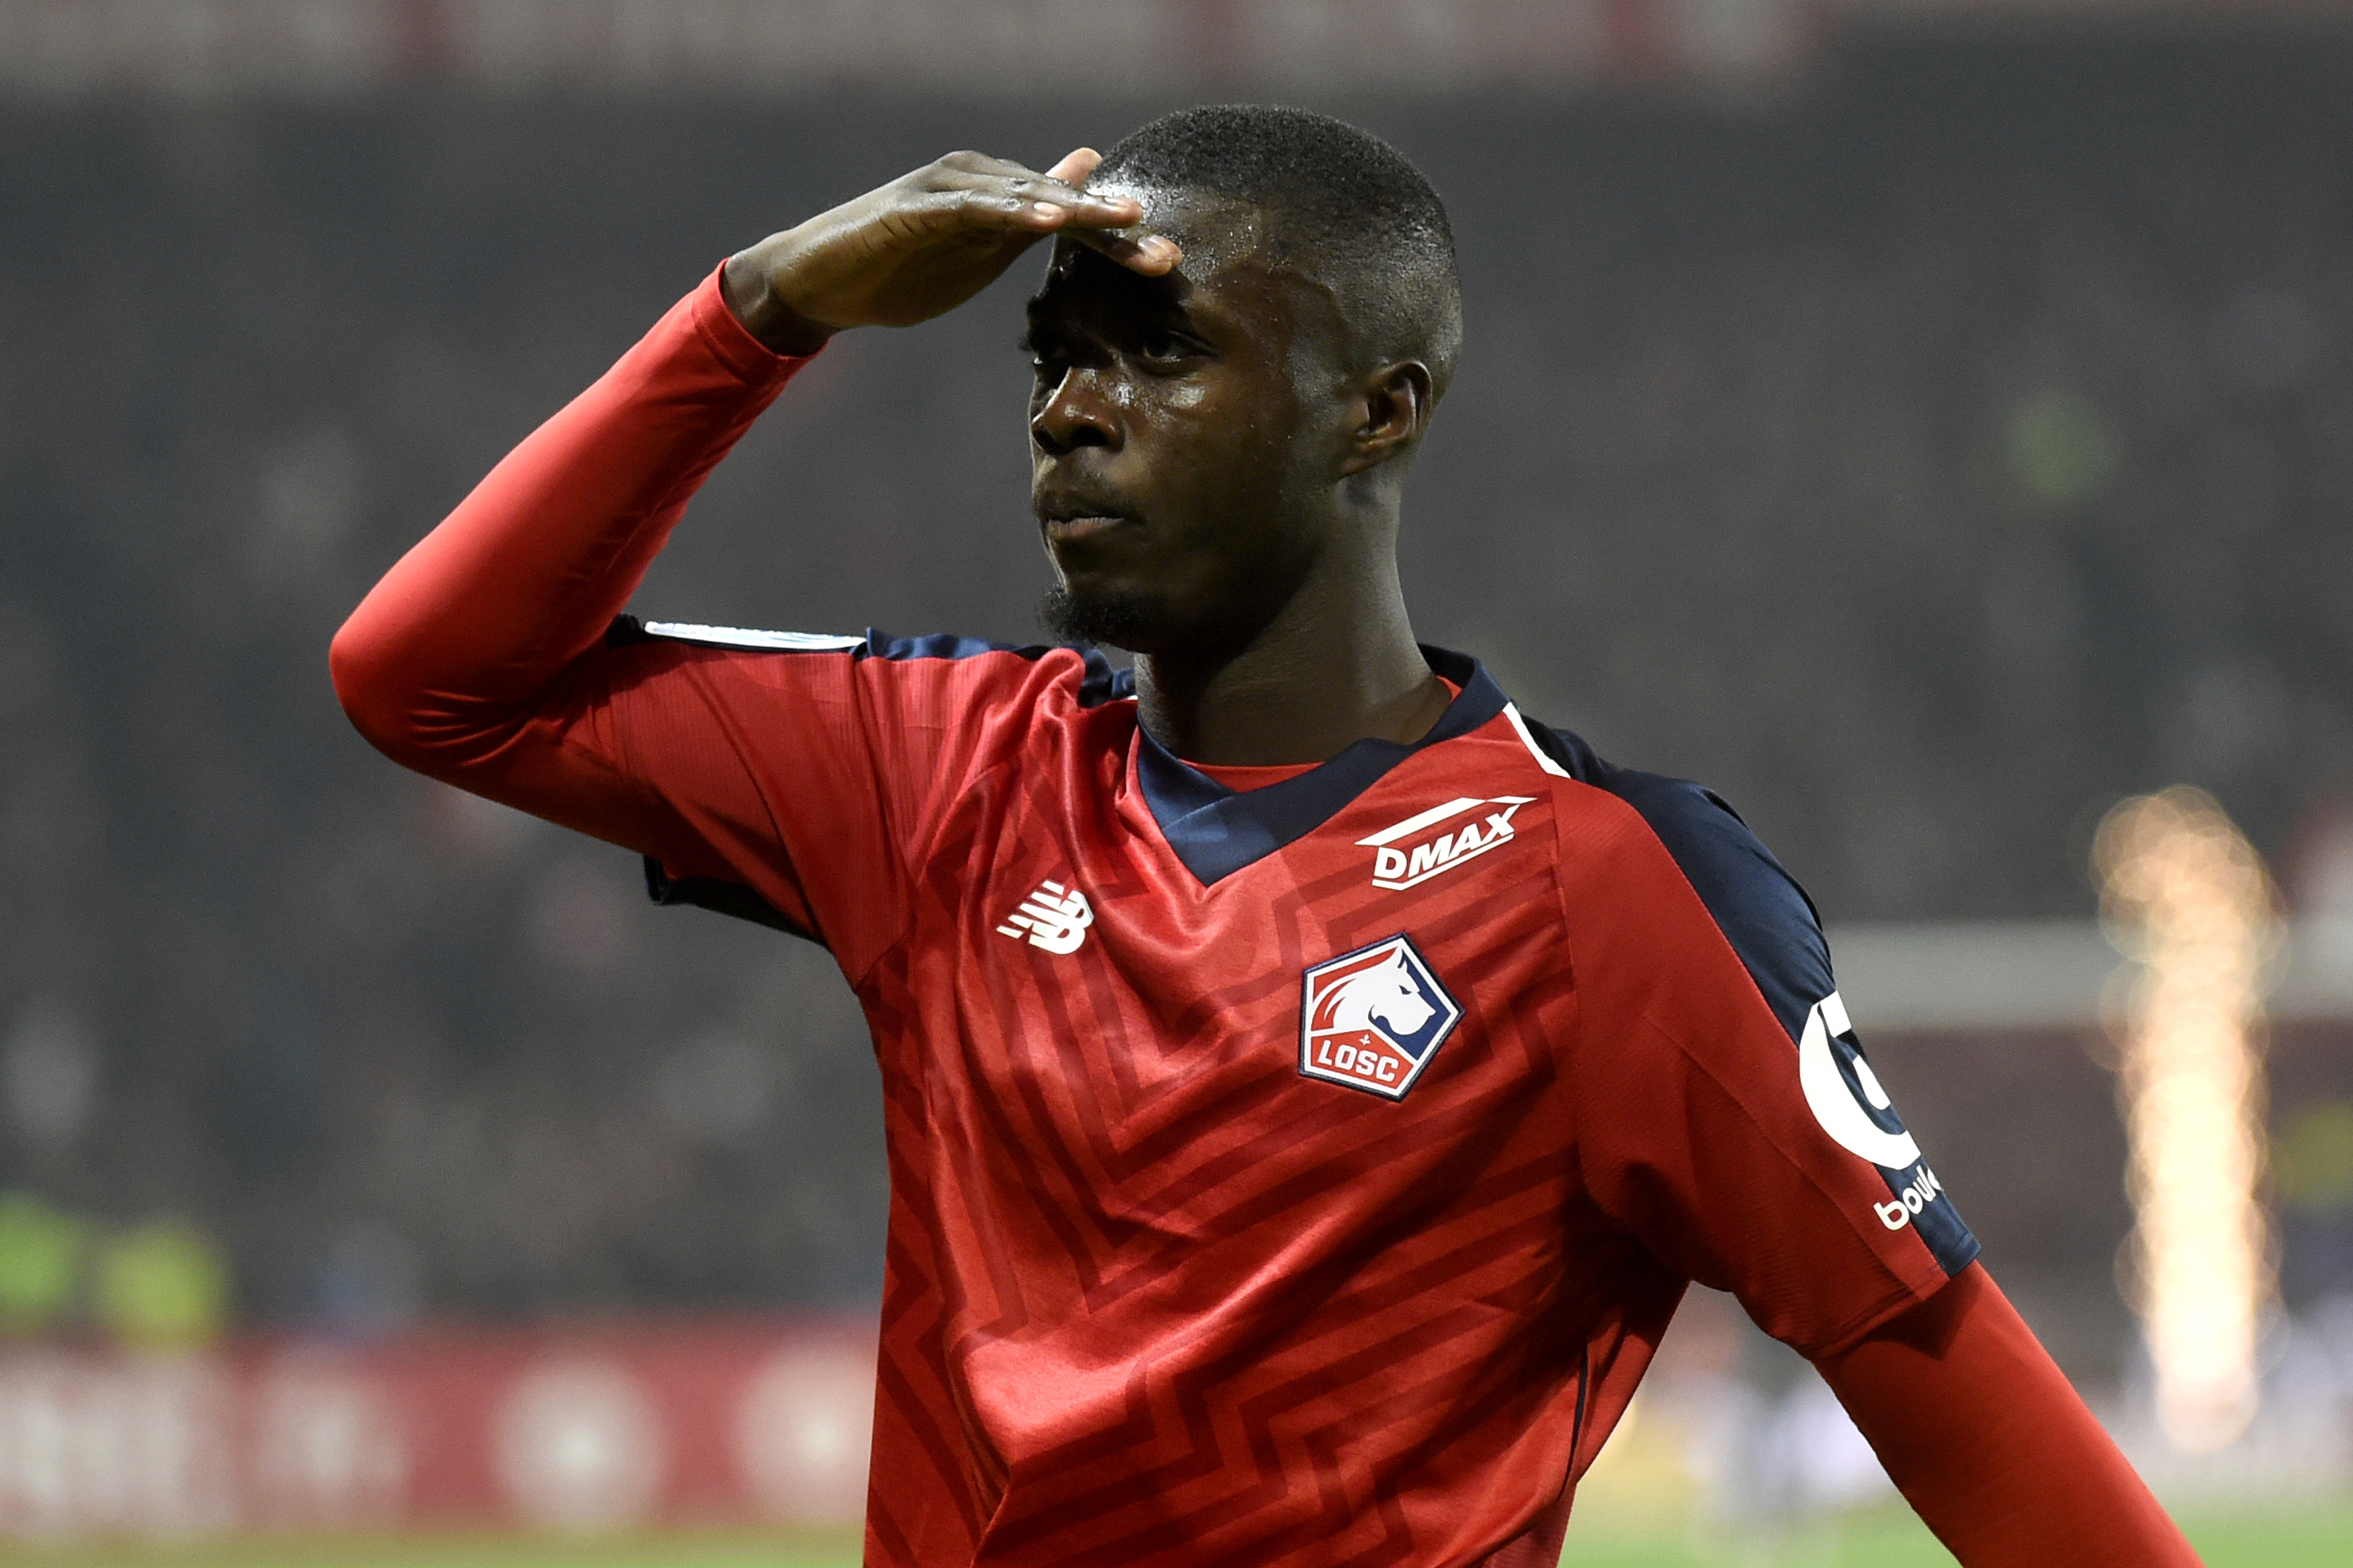 Lille's Ivorian forward Nicolas Pepe celebrates after scoring a goal during the French L1 football match between Lille (LOSC) and Olympique Lyonnais (OL) on December 1, 2018 at the Pierre Mauroy Stadium in Villenueve d'Ascq. (Photo by FRANCOIS LO PRESTI / AFP)        (Photo credit should read FRANCOIS LO PRESTI/AFP/Getty Images)